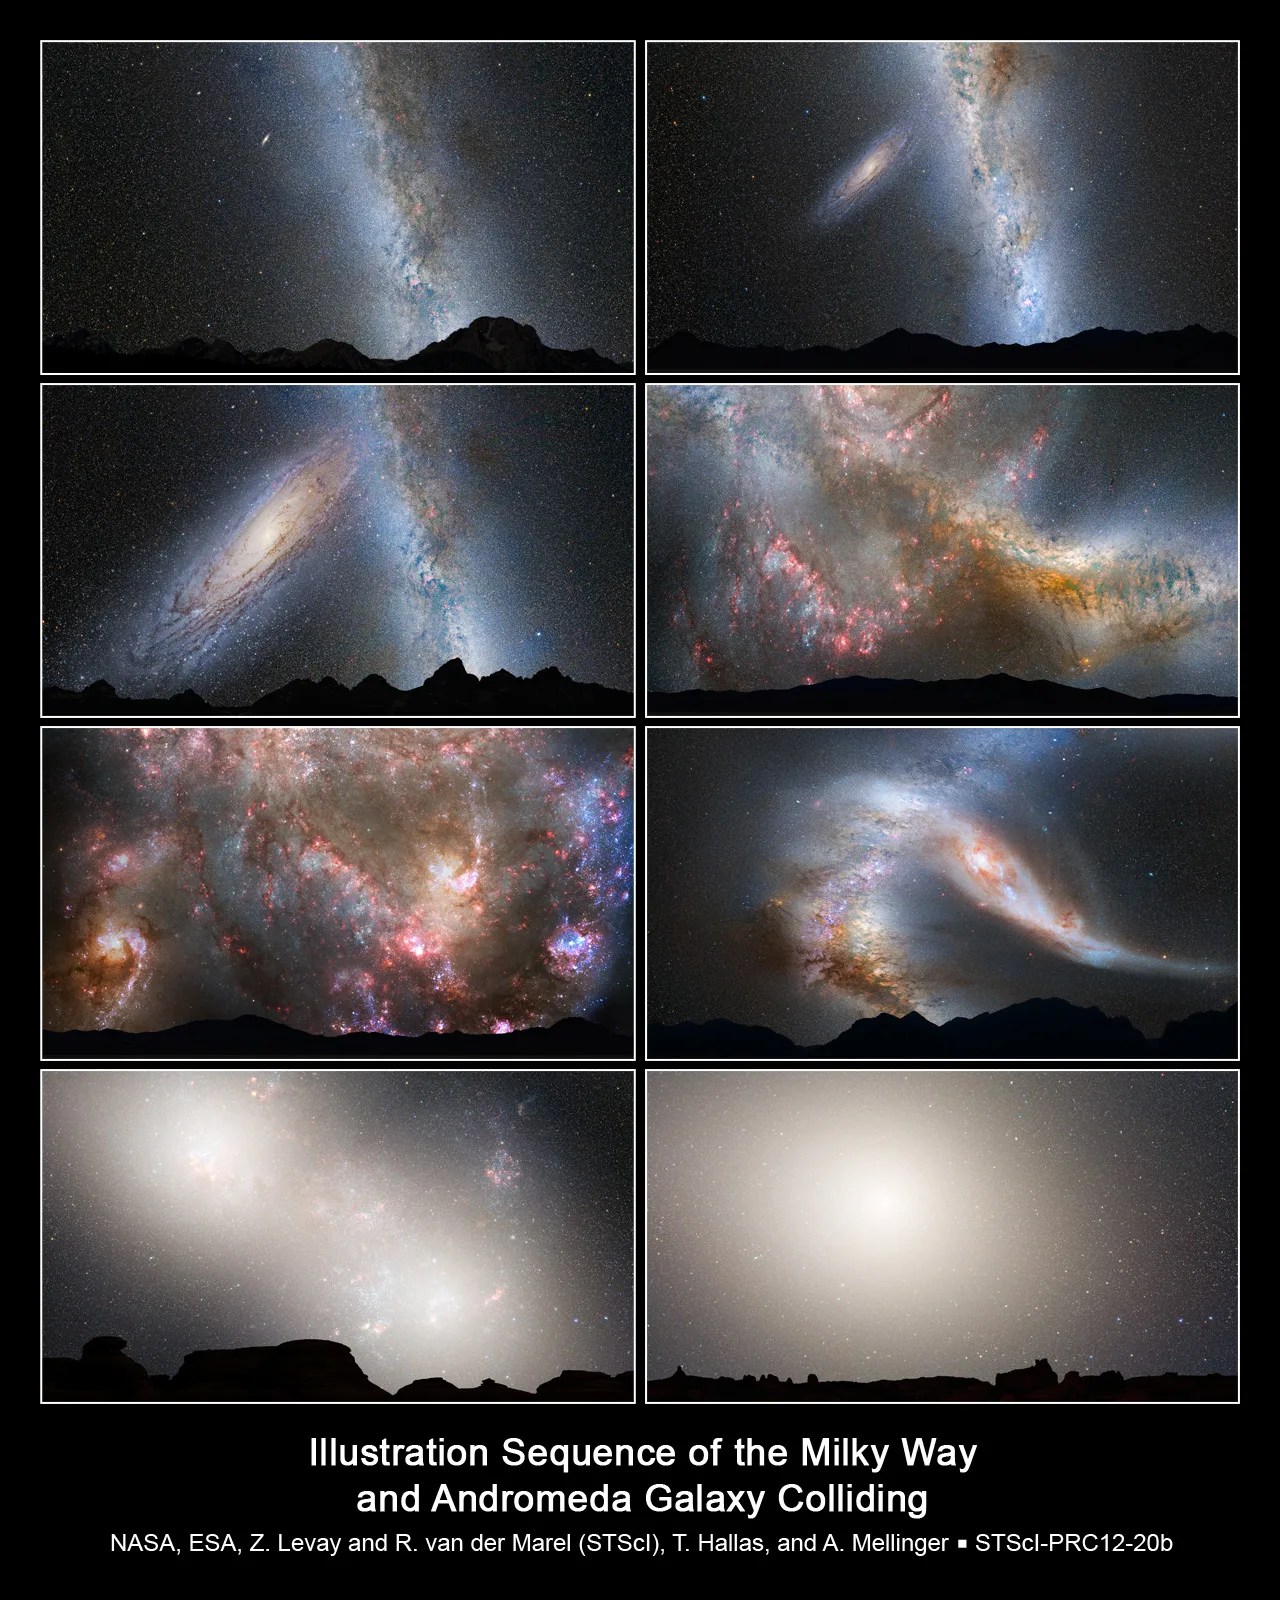 eight images showing steps in merger between Milky Way and Andromeda galaxies